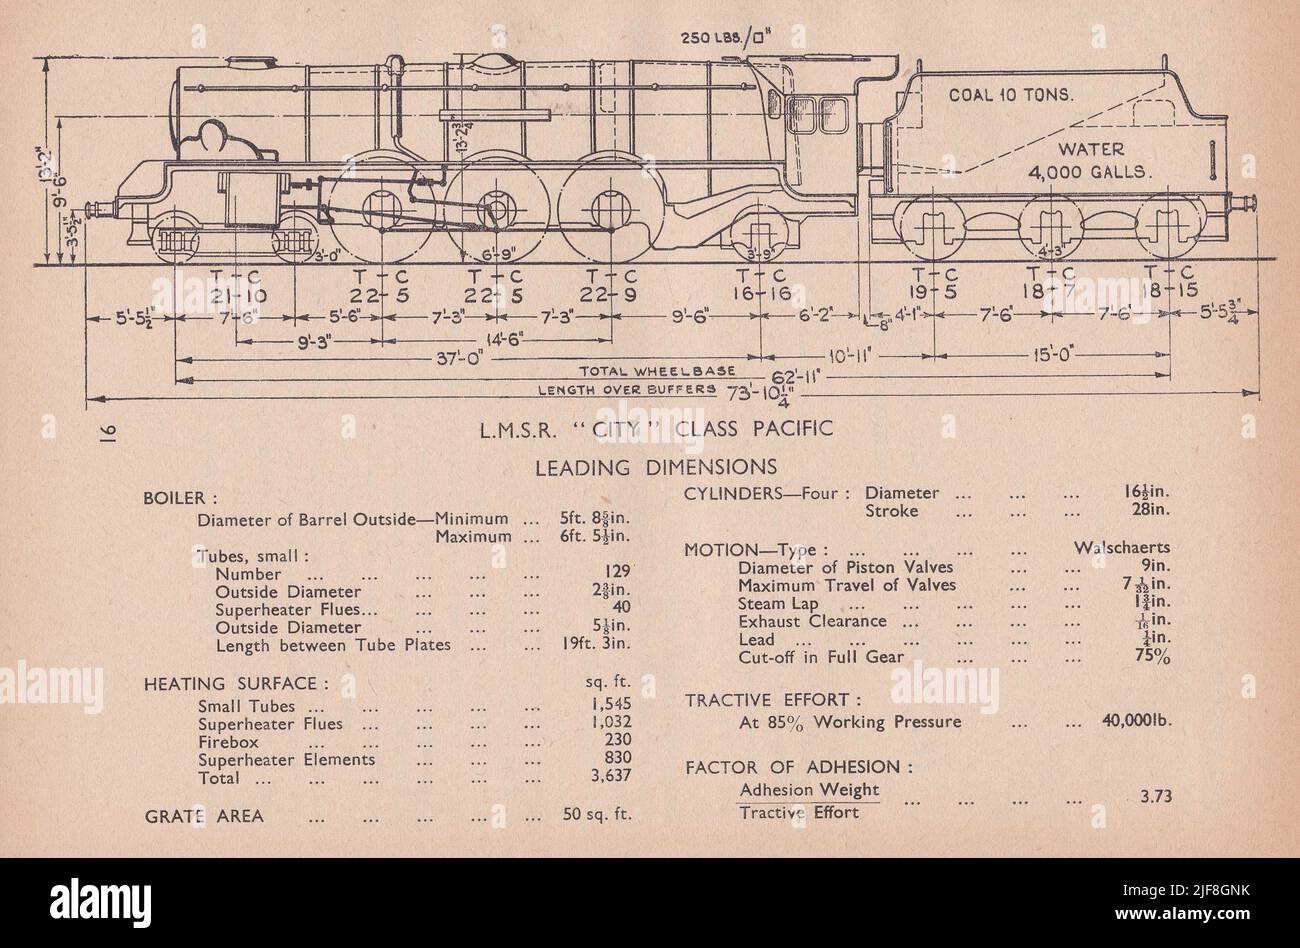 Vintage diagram of a L.M.S.R. City Class Pacific Leading Dimensions. Stock Photo